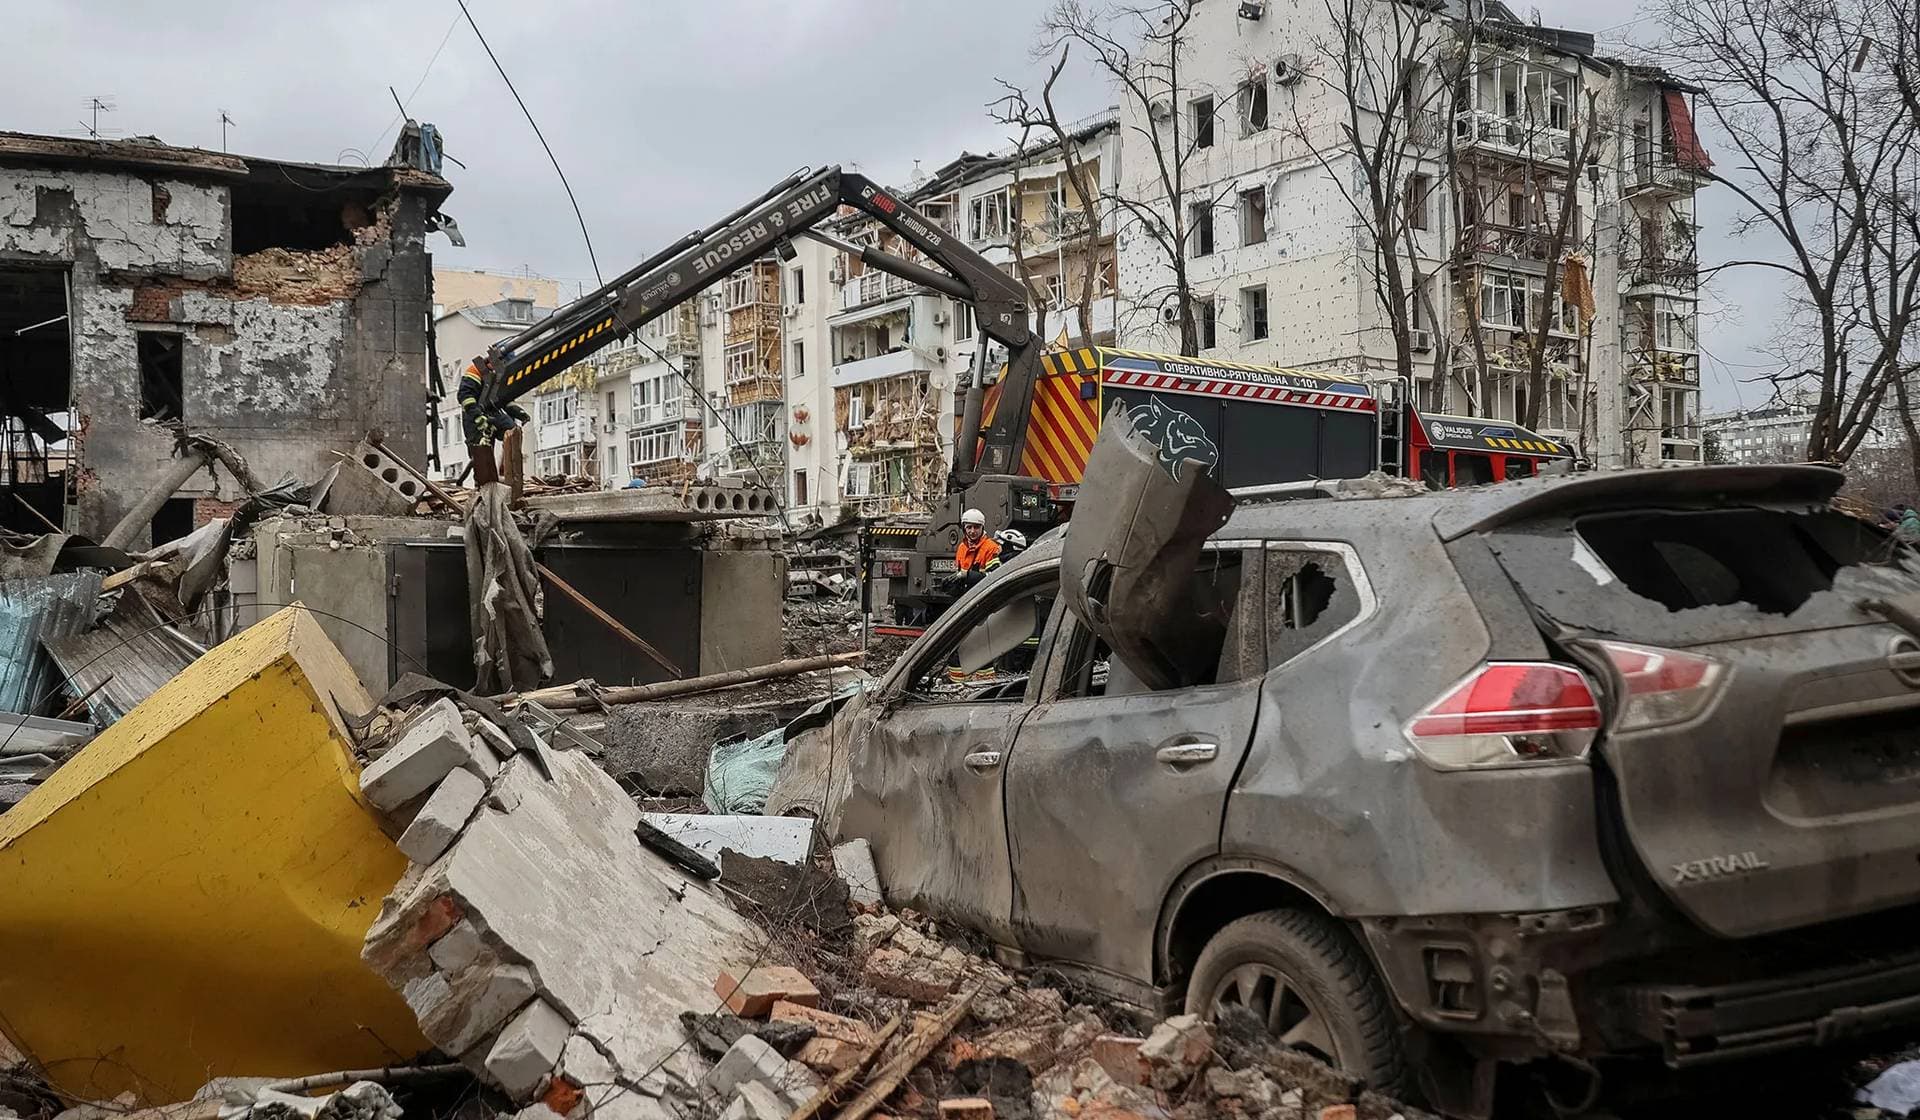 Rubble and a damaged car at the site where a residential building was heavily damaged during a Russian missile attack in central Kharkiv